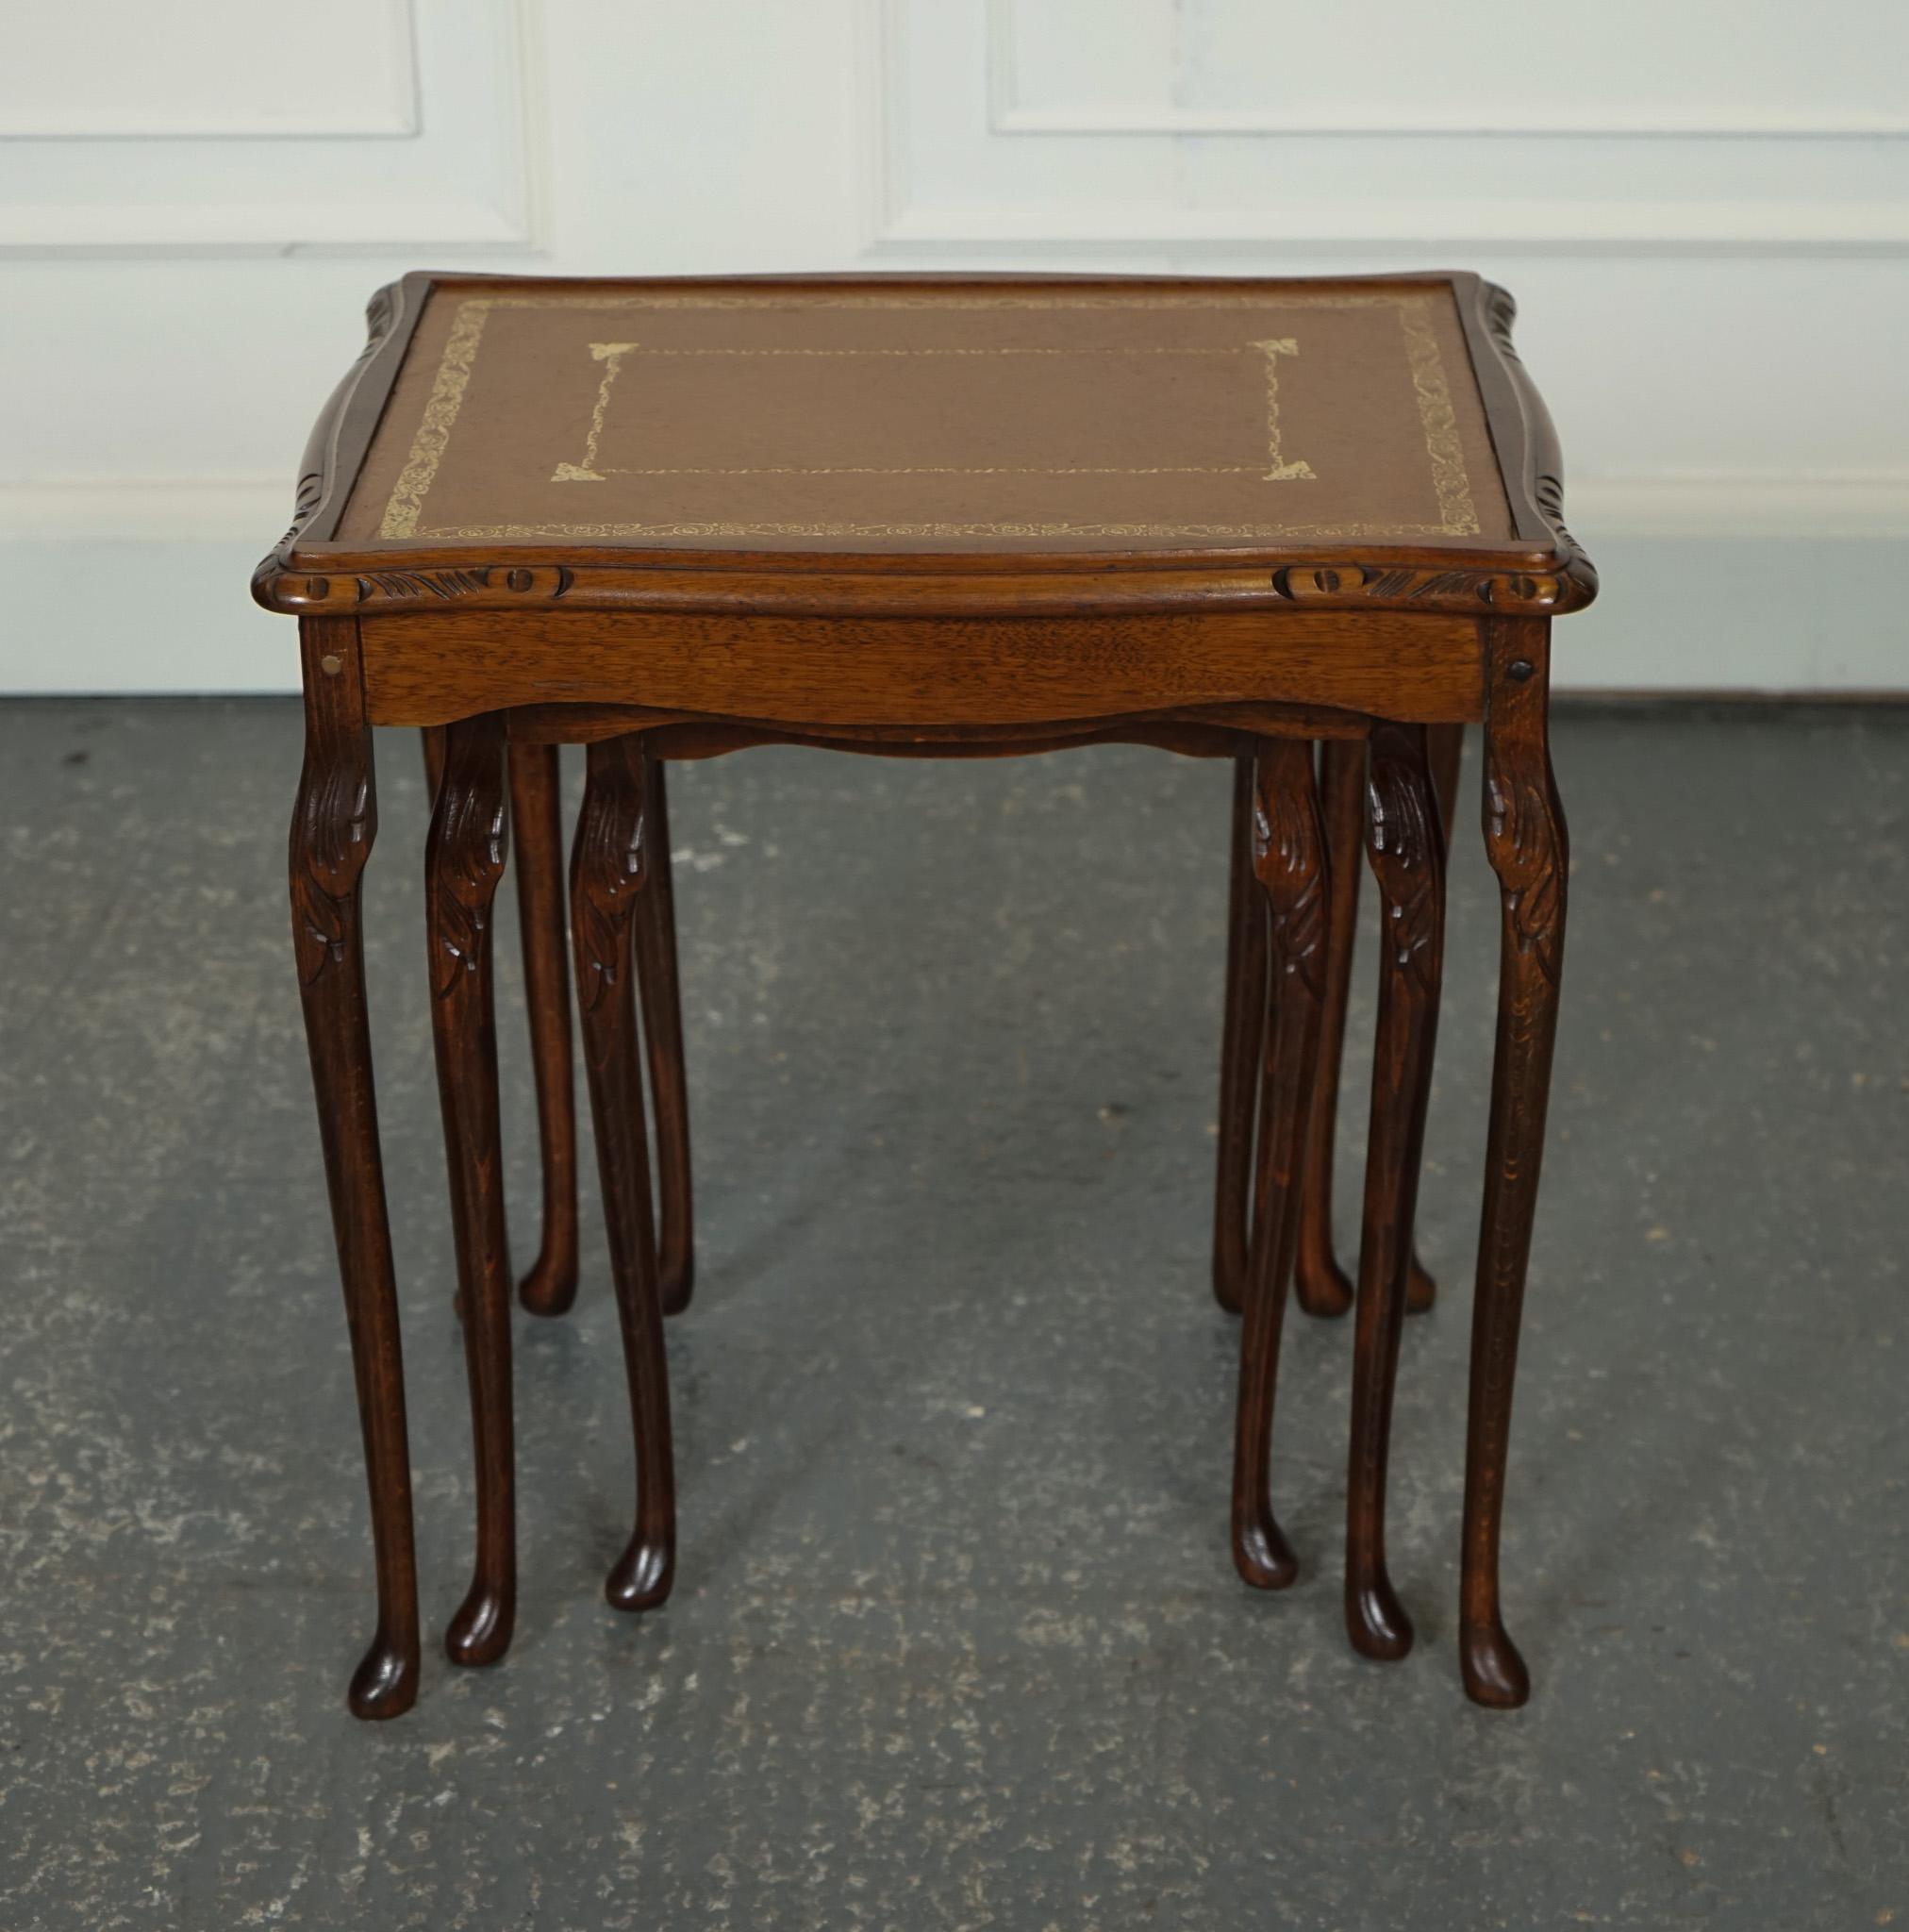 VINTAGE NEST OF TABLES QUEEN ANNE  Style LEGS WiTH BROWN EMBOSsed LEATHER TOP J1 im Angebot 1